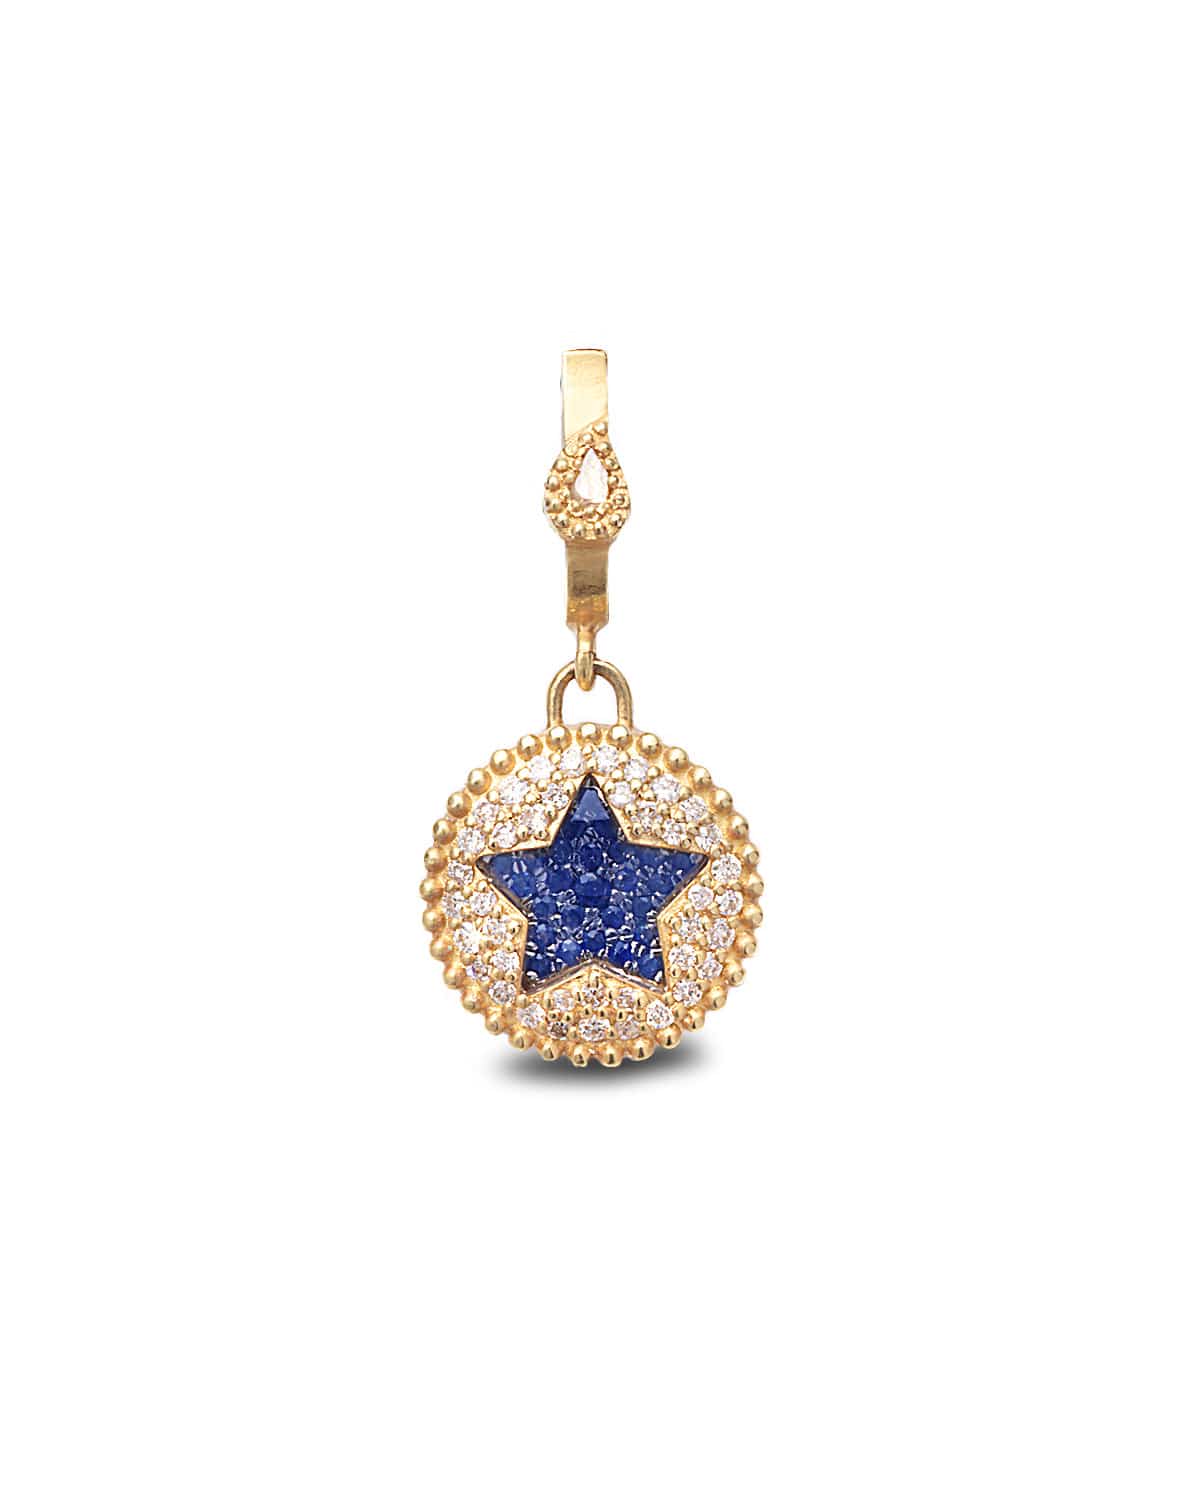 The Crystal Blue Star Pendant - Coomi